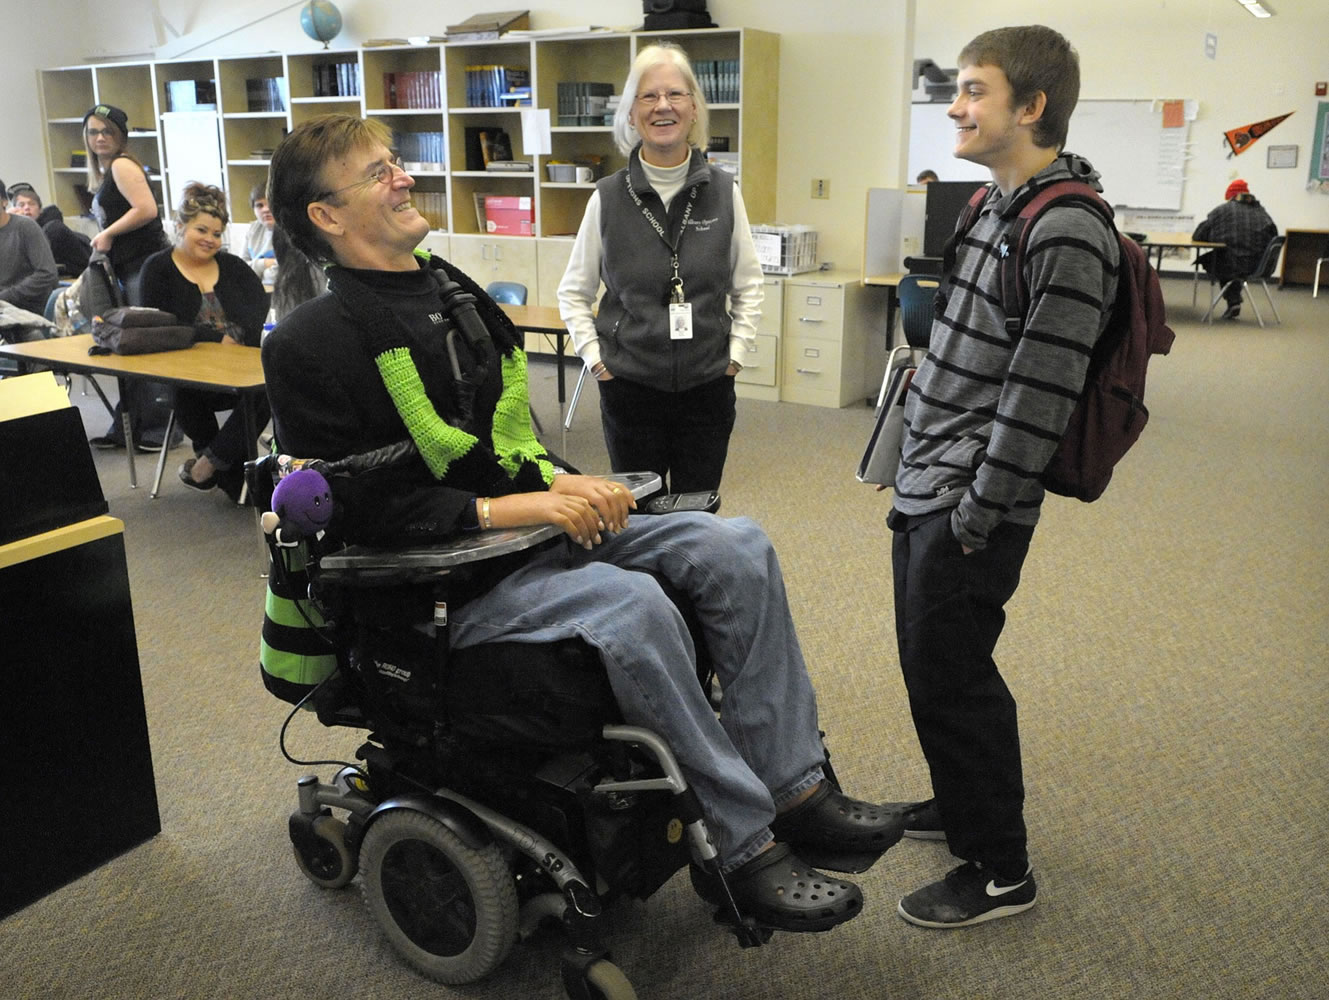 Motivational speaker Ron Heagy Jr. of Millersburg, Ore., left, talks with Warren Scott Brown, 17, and teacher Deanna Kozak after speaking to students at Albany Options School in Albany, Ore.